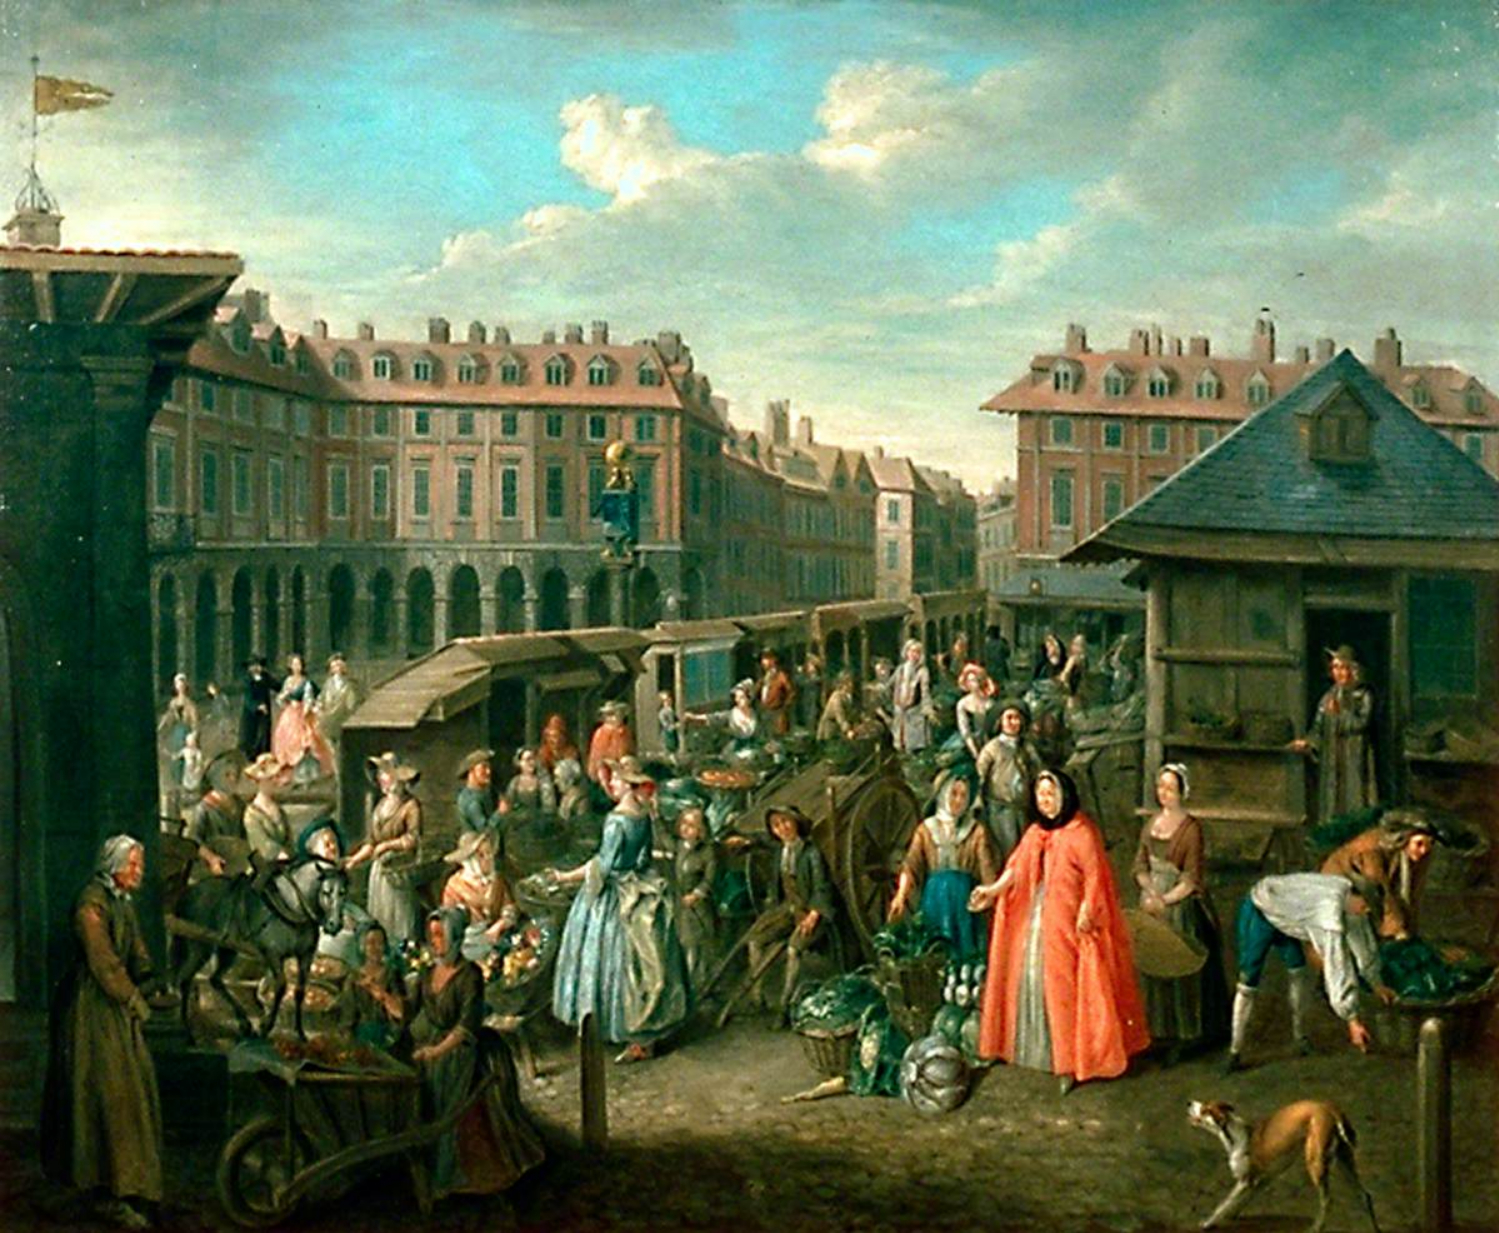 A landscape view of townspeople gathered in the streets